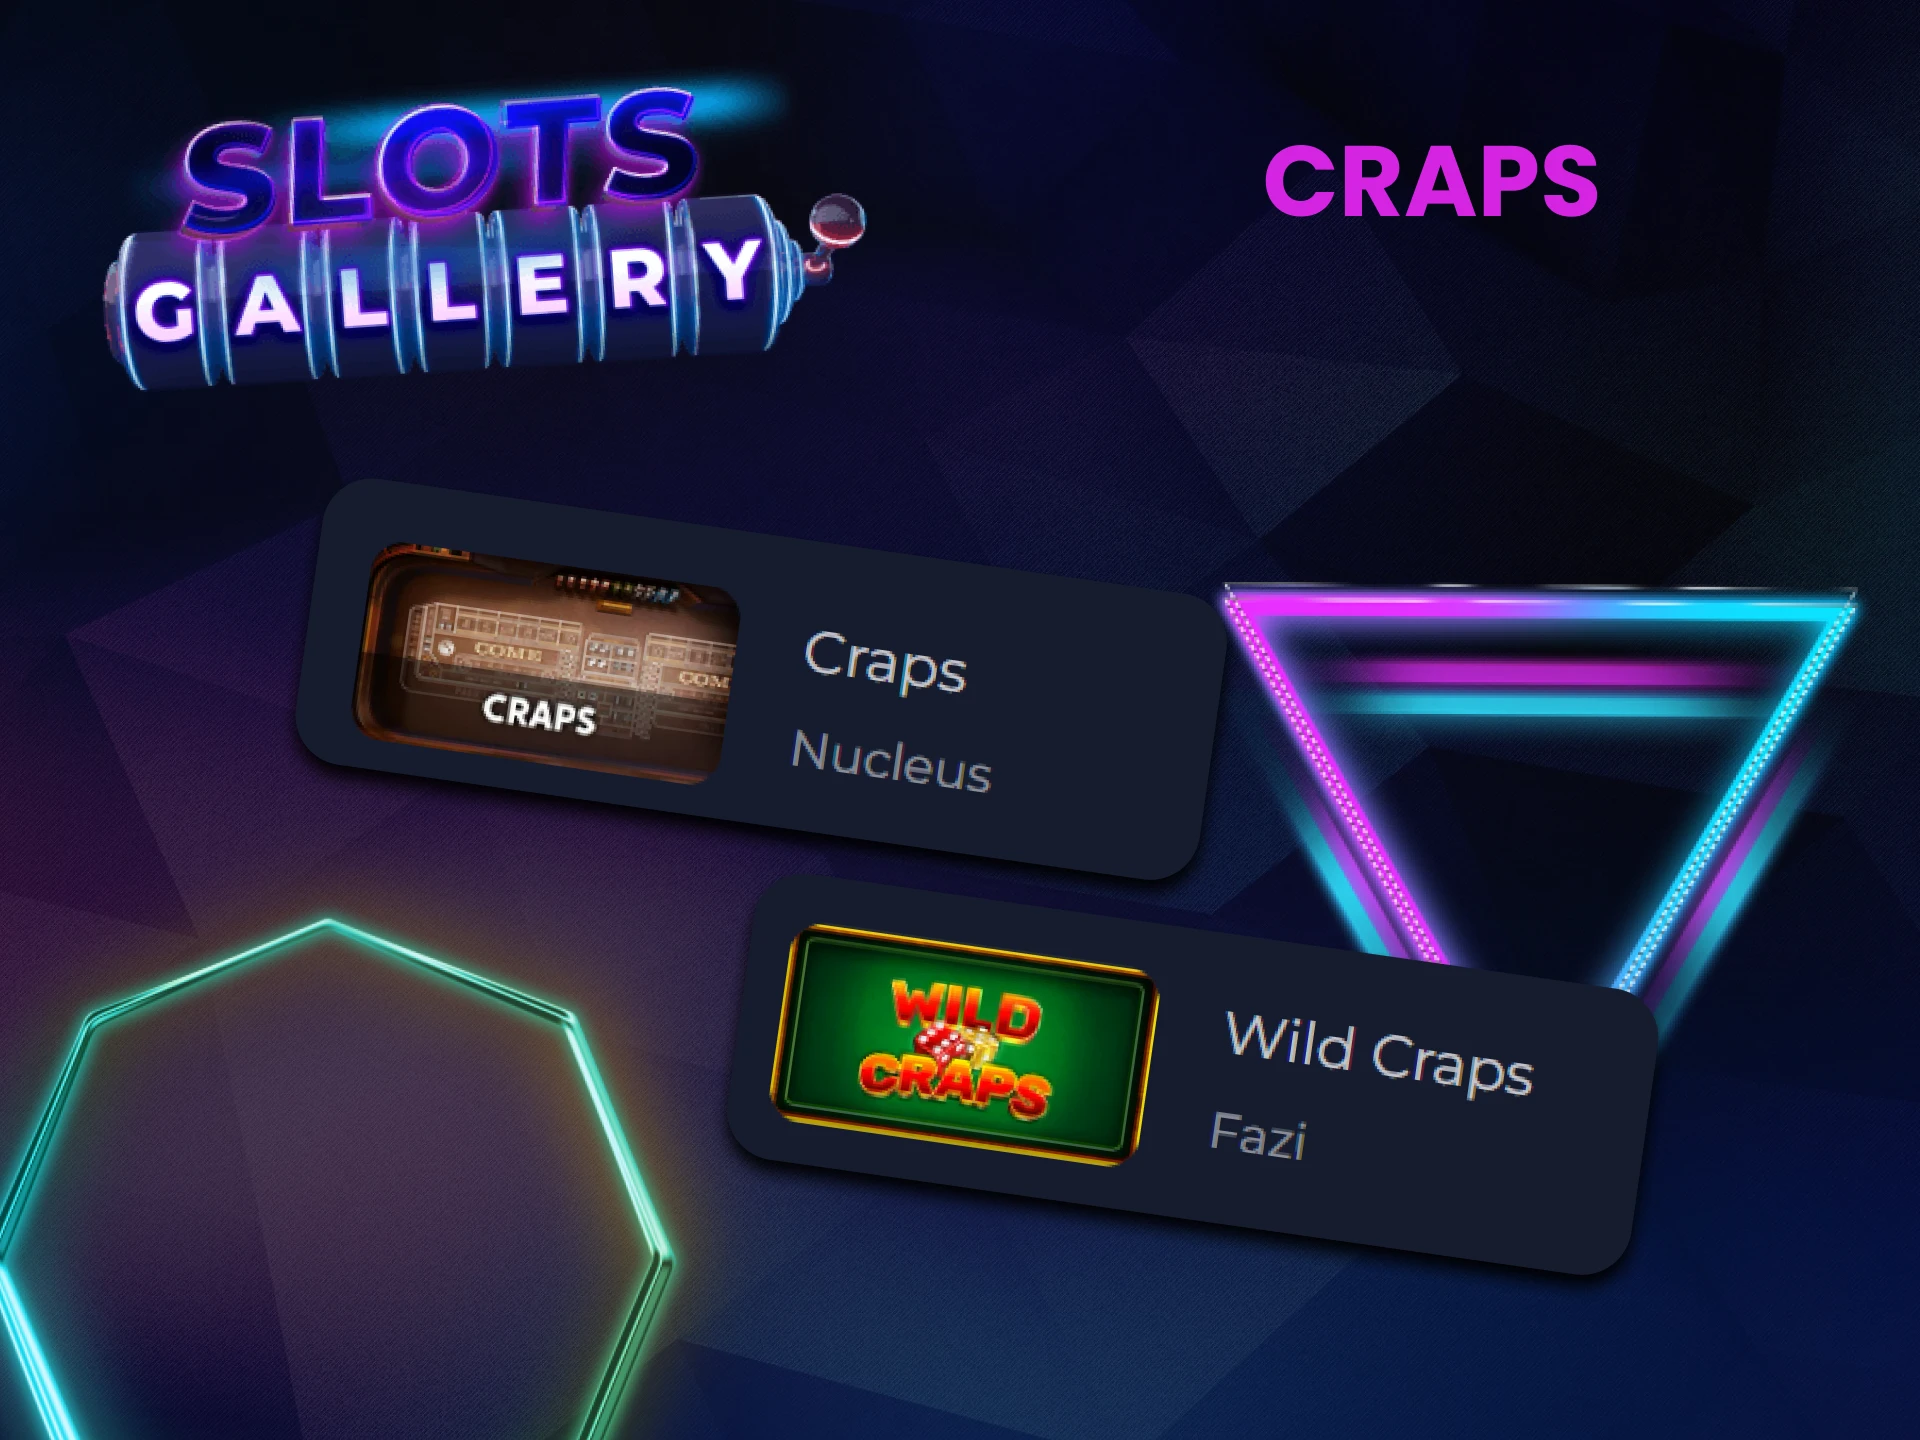 To play at Slots Gallery, choose Craps.